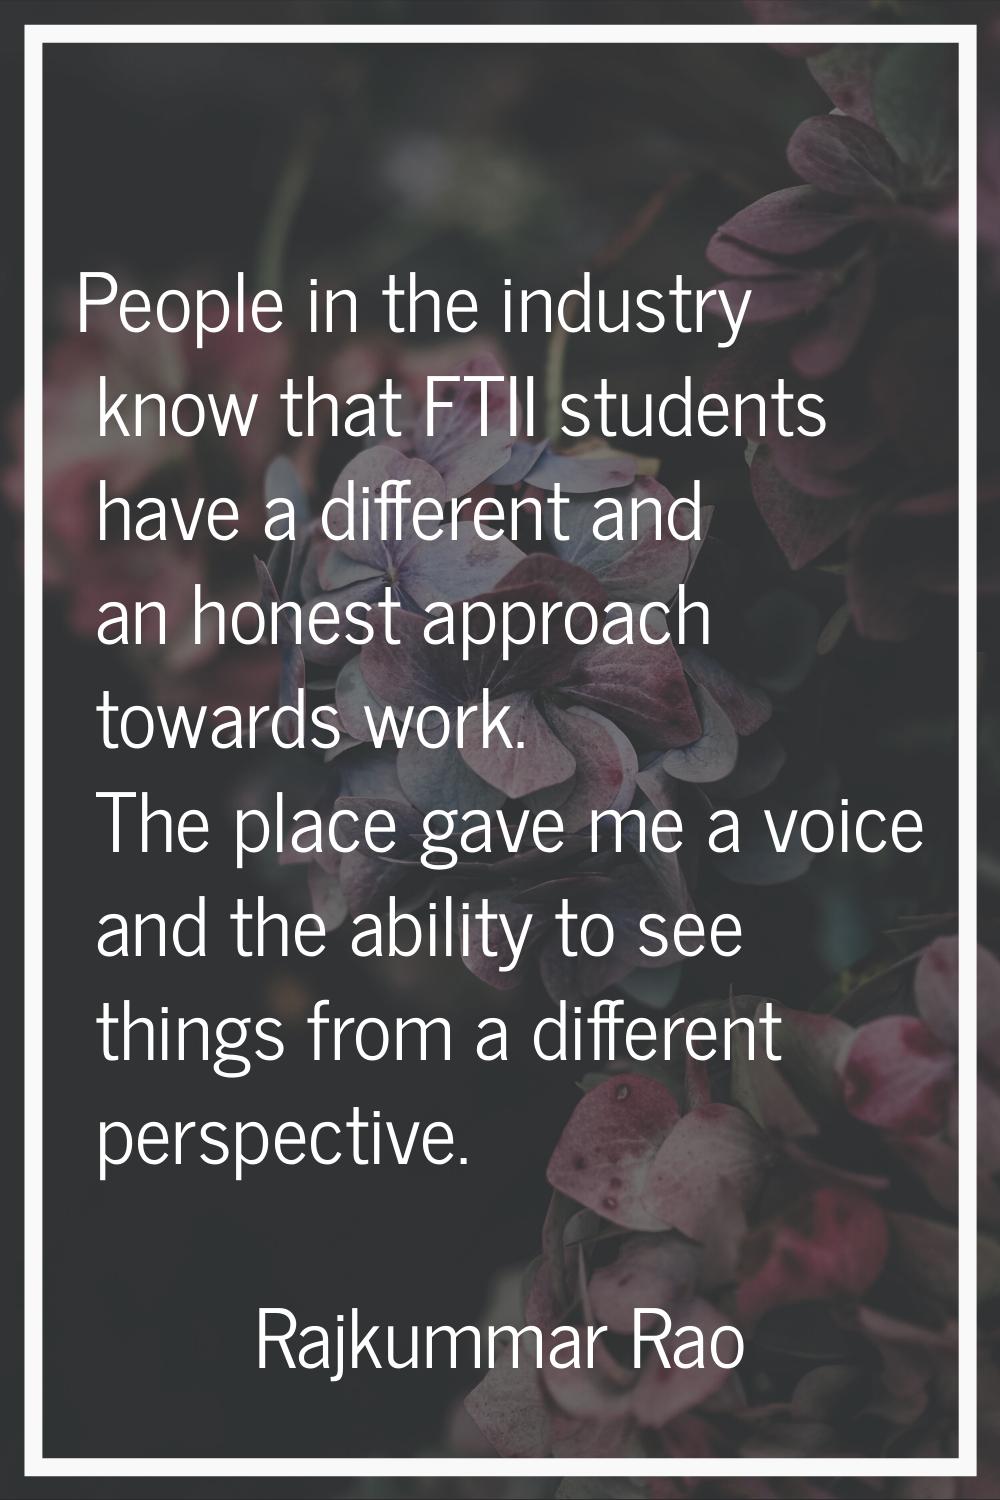 People in the industry know that FTII students have a different and an honest approach towards work